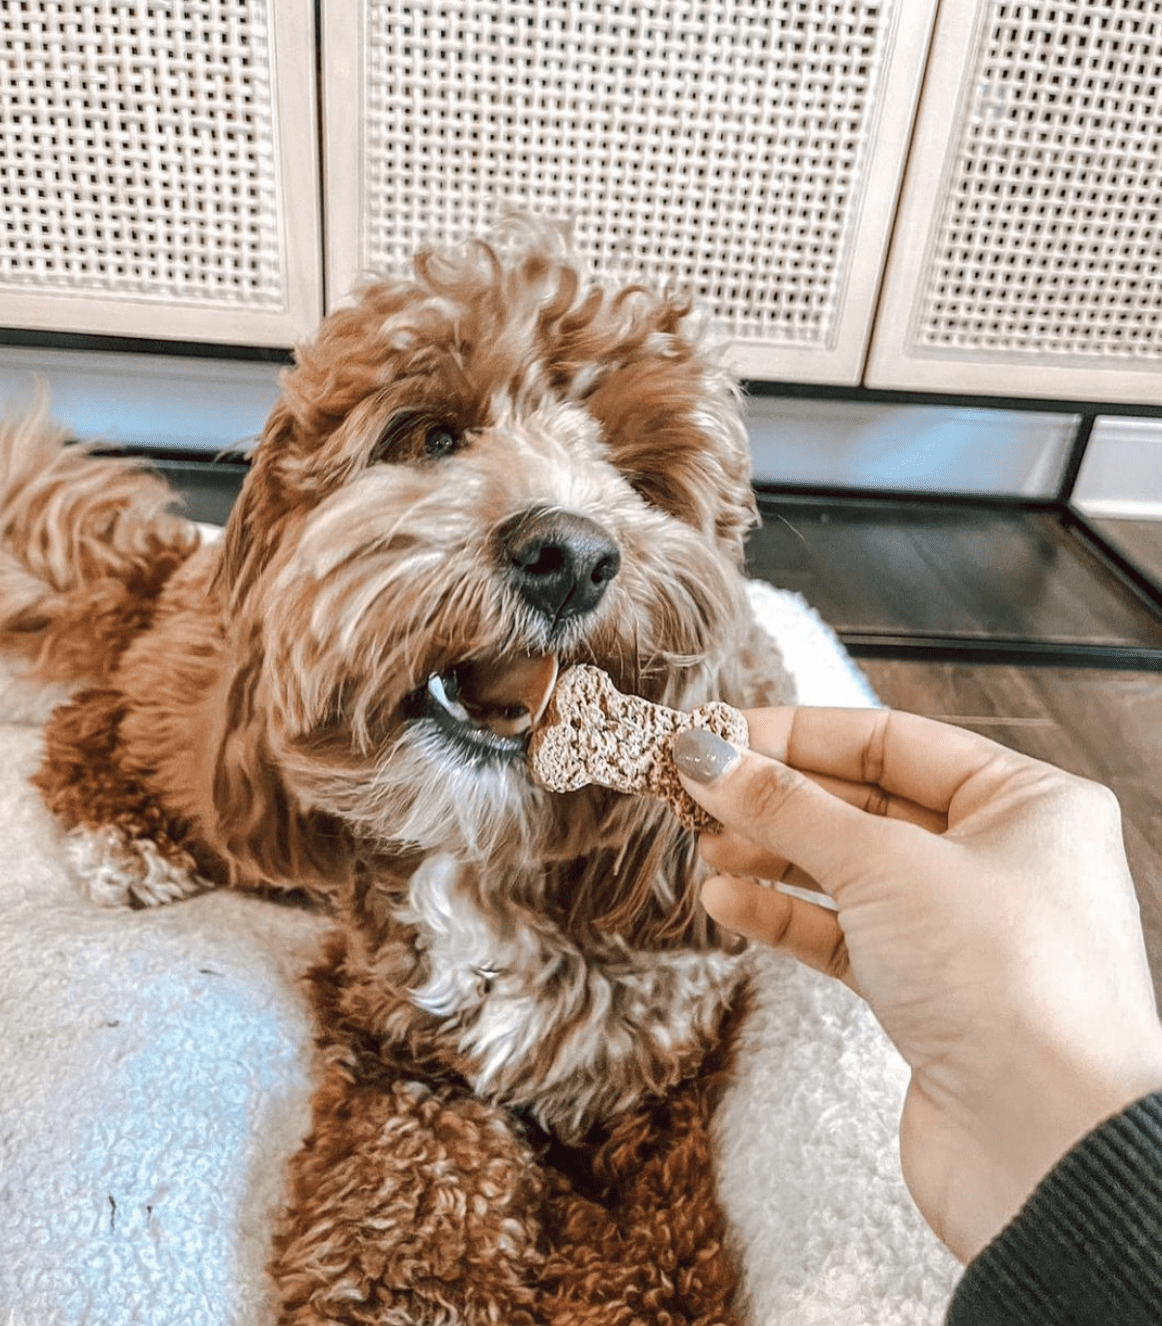 CBD-infused dog treats can keep your pup calm